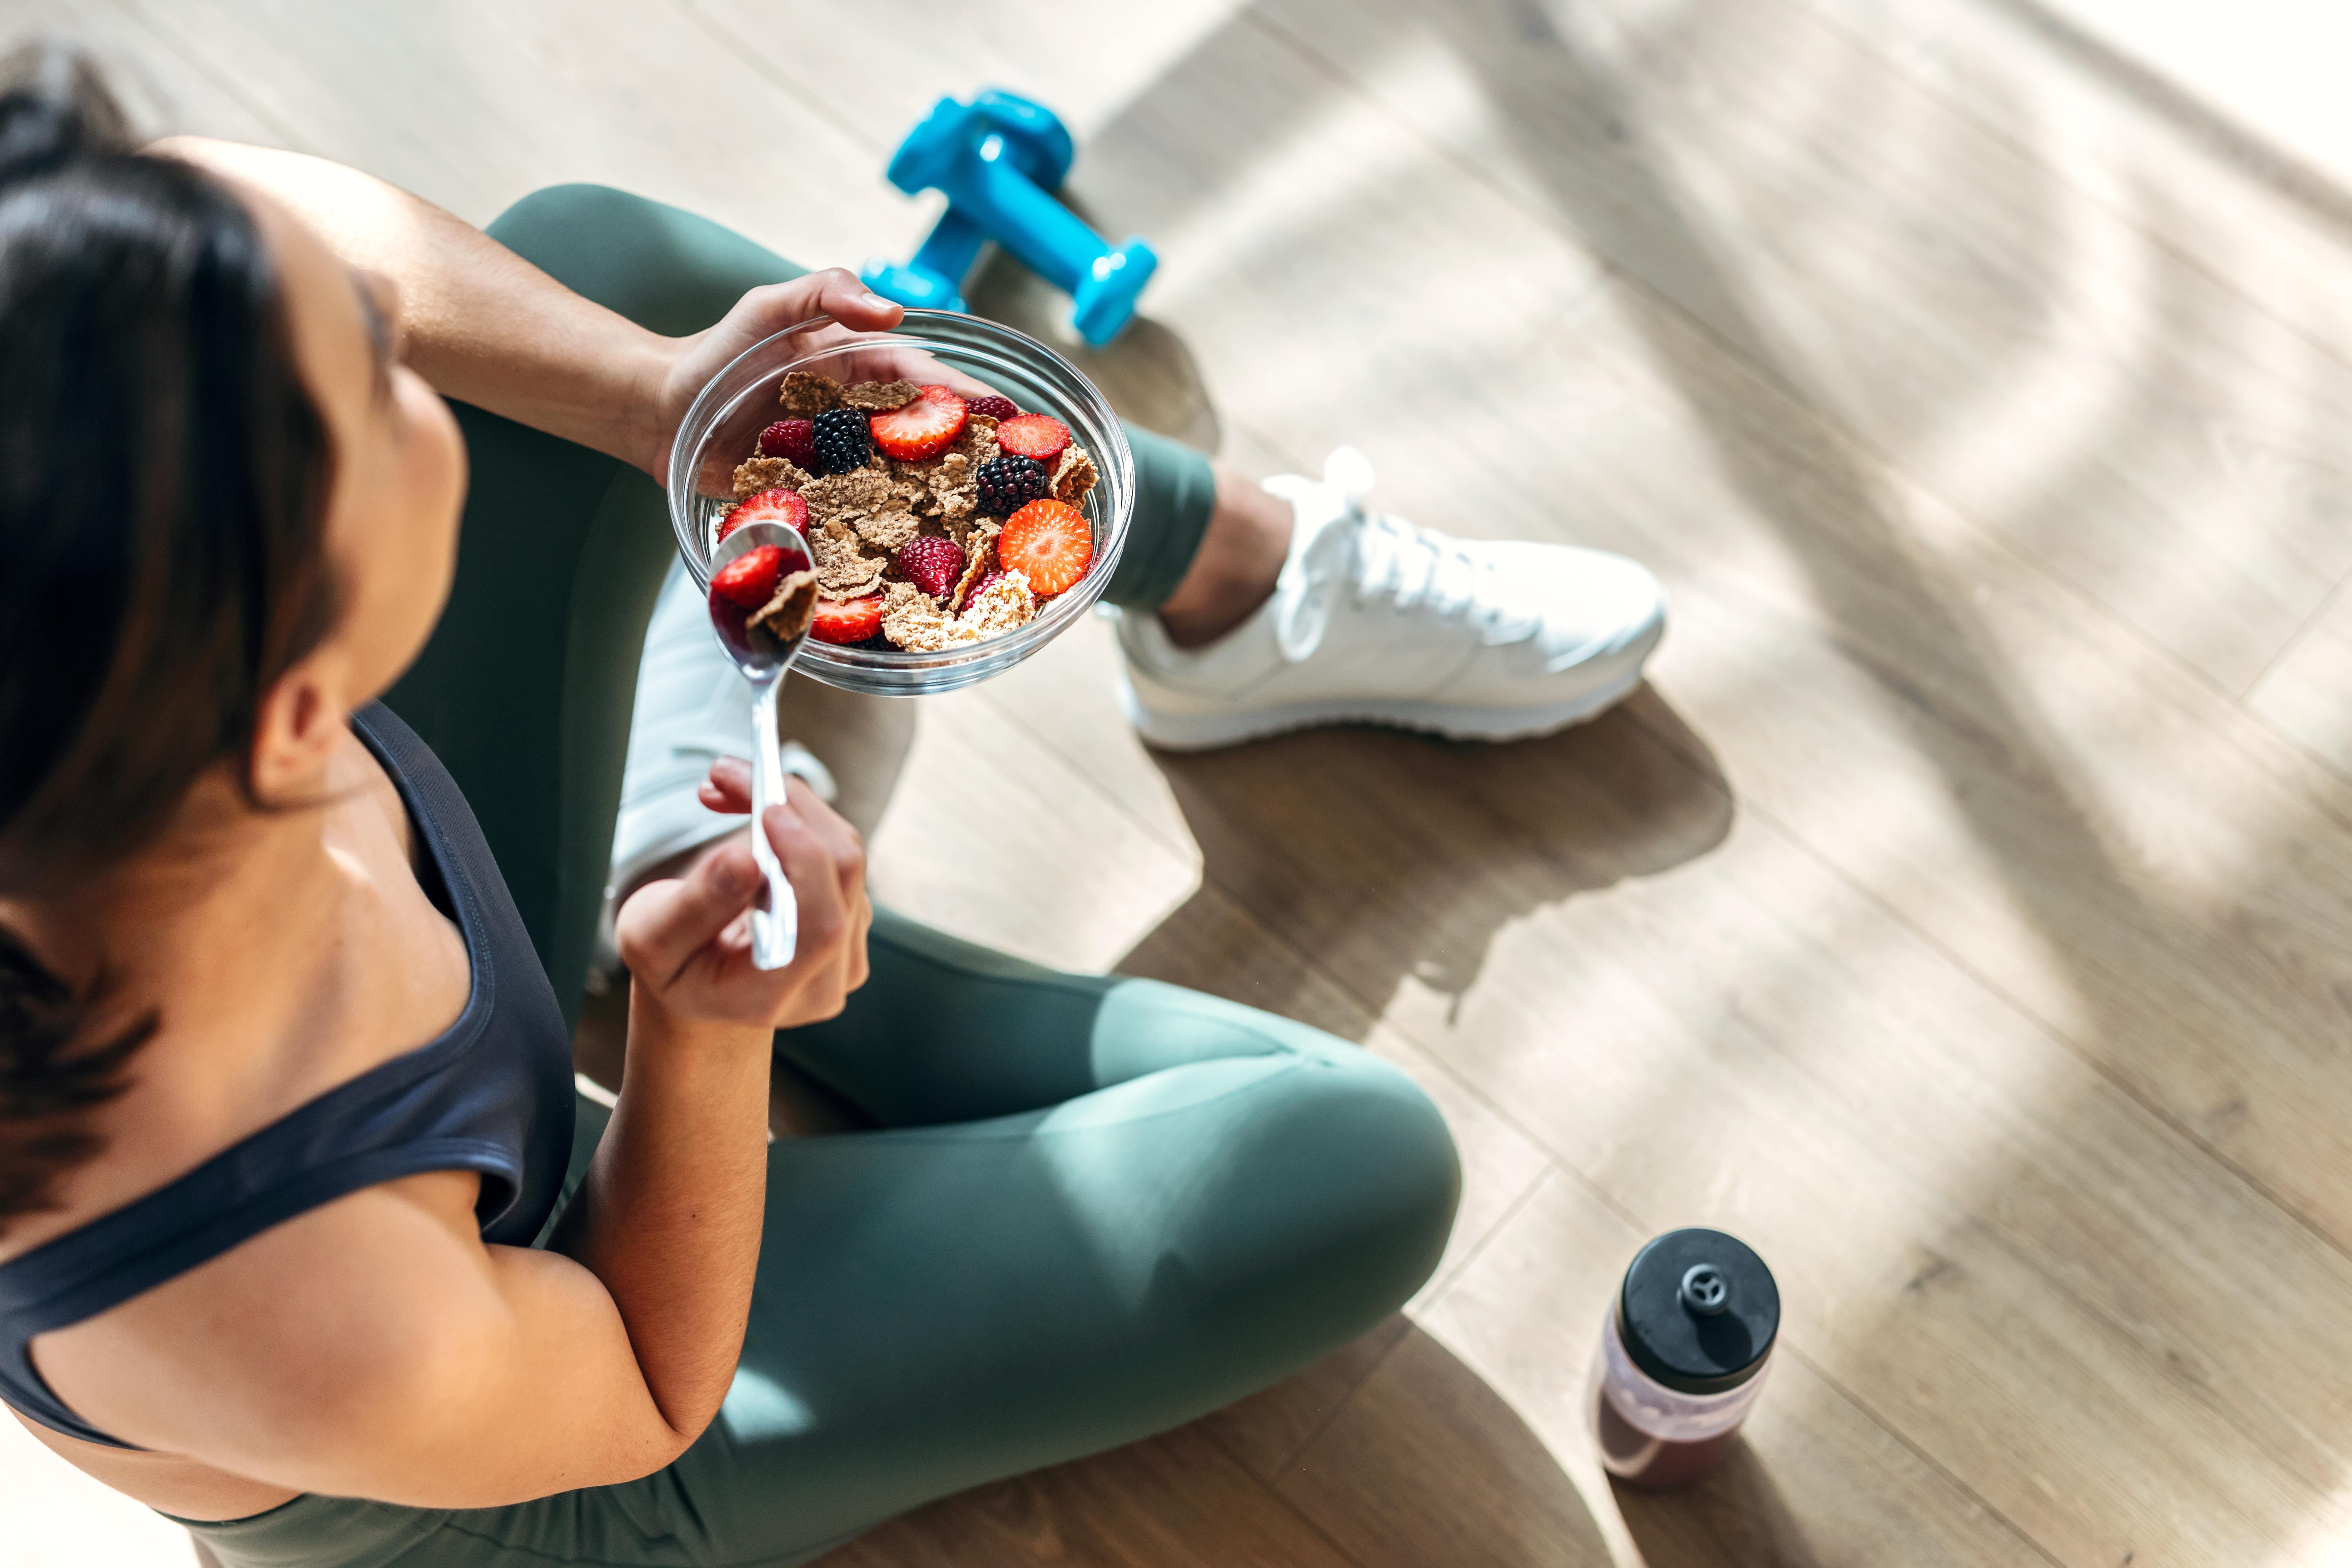 A woman eating a breakfast of berries and bran flakes after her morning exercise. Her weights and water bottle lie on the floor beside her